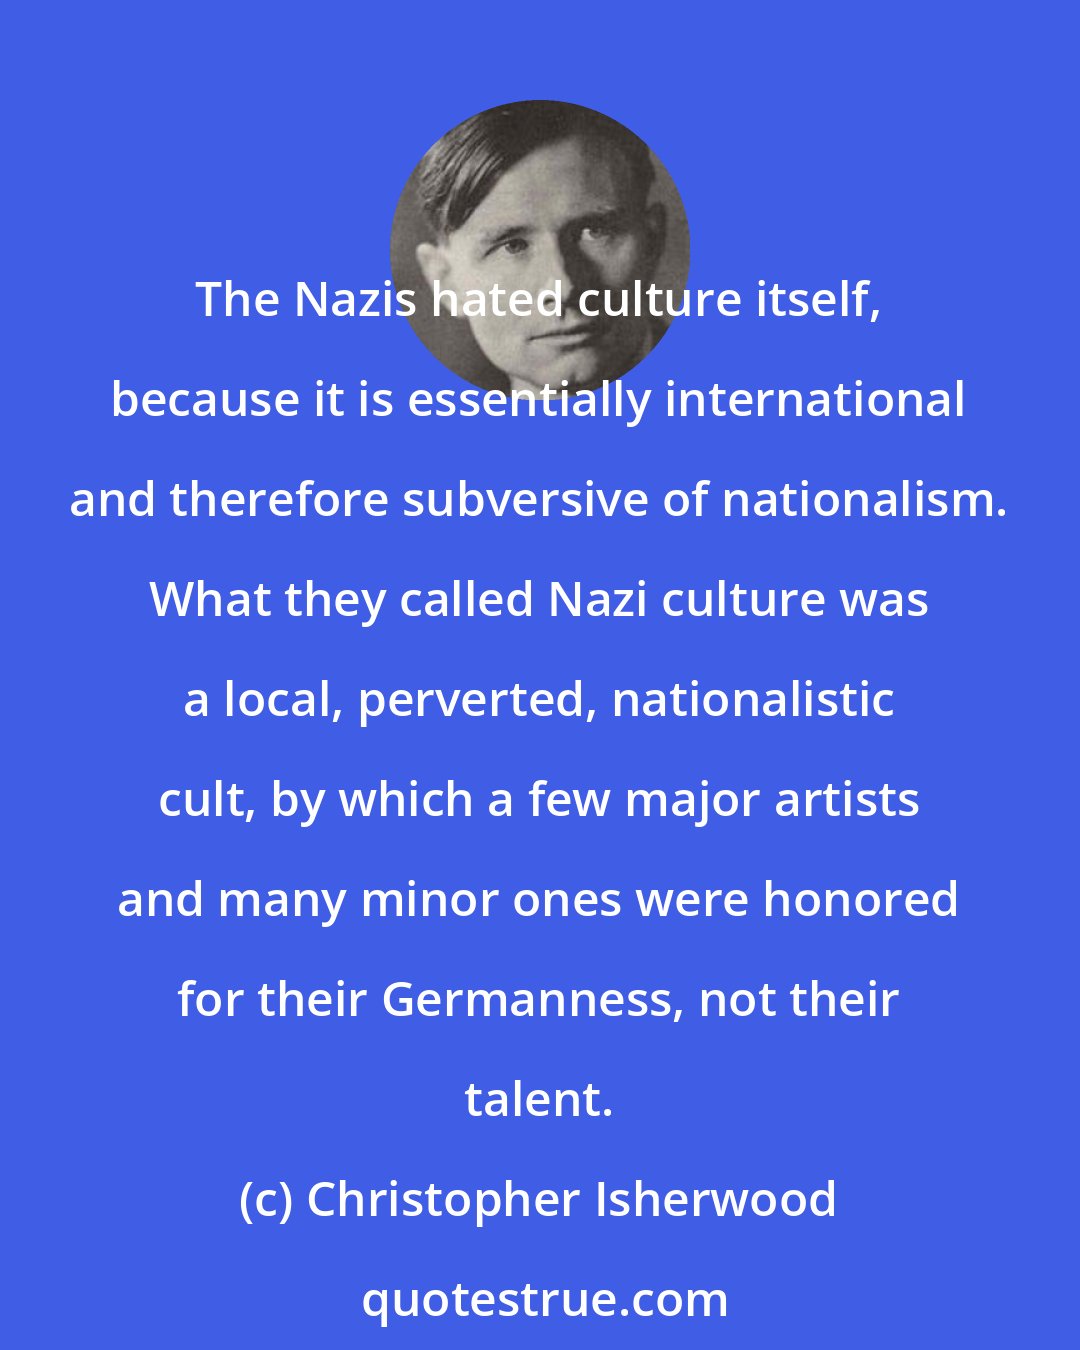 Christopher Isherwood: The Nazis hated culture itself, because it is essentially international and therefore subversive of nationalism. What they called Nazi culture was a local, perverted, nationalistic cult, by which a few major artists and many minor ones were honored for their Germanness, not their talent.